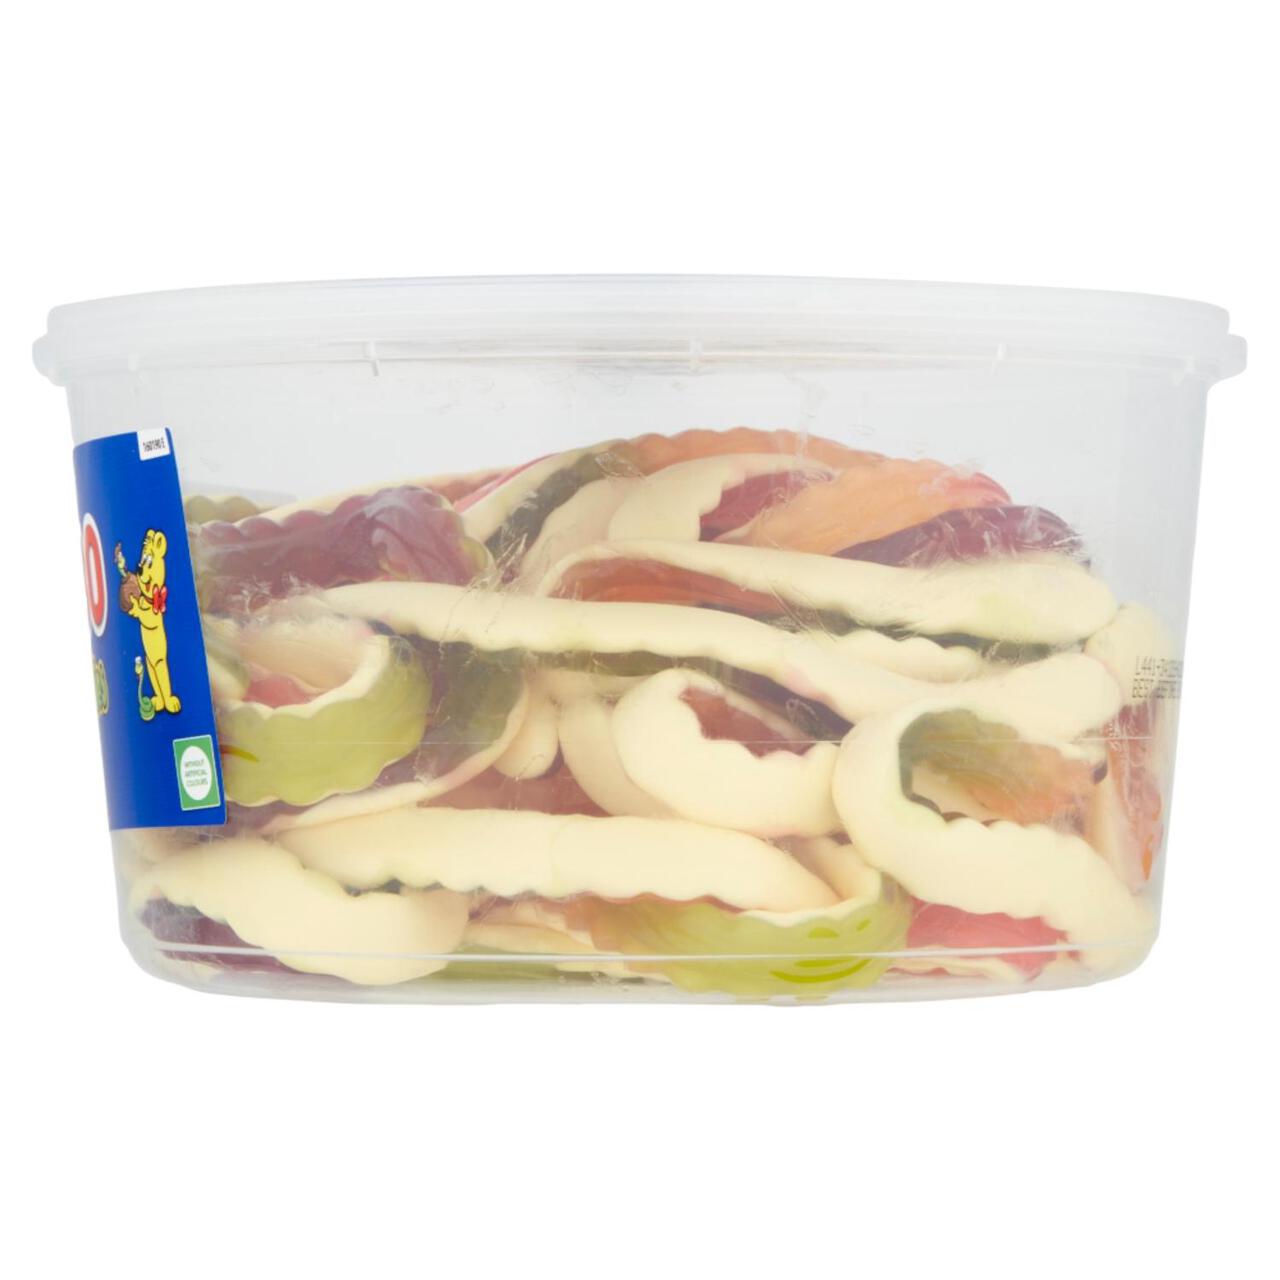 Haribo Yellow Bellies Giant Snakes Sweets Tub 768g